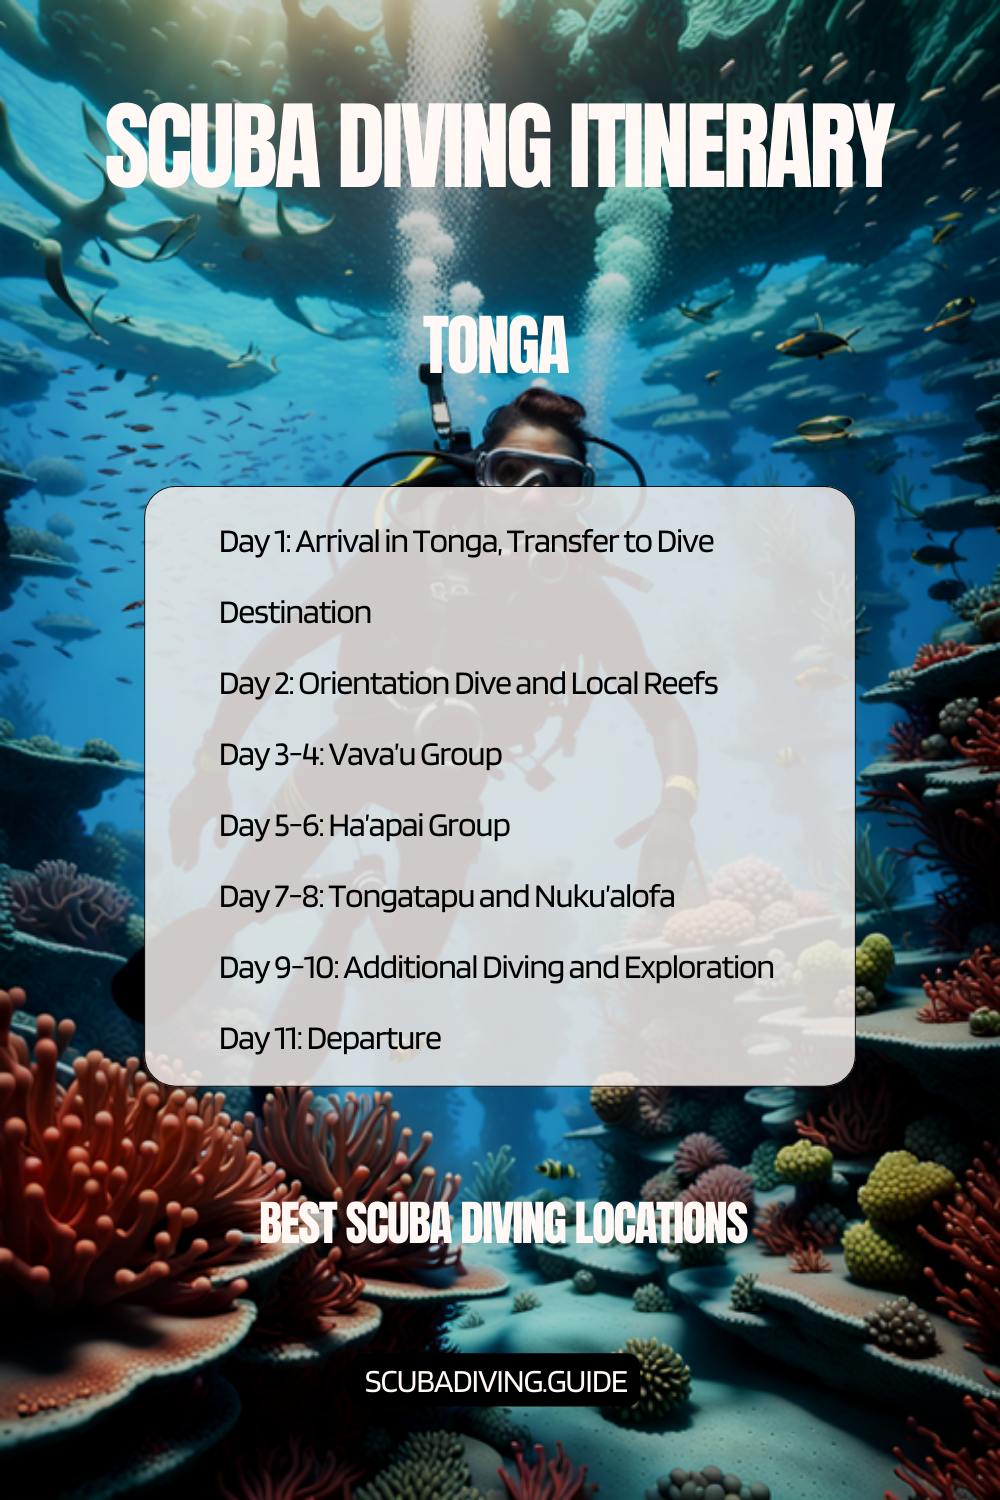 Tonga Recommended Scuba Diving Itinerary